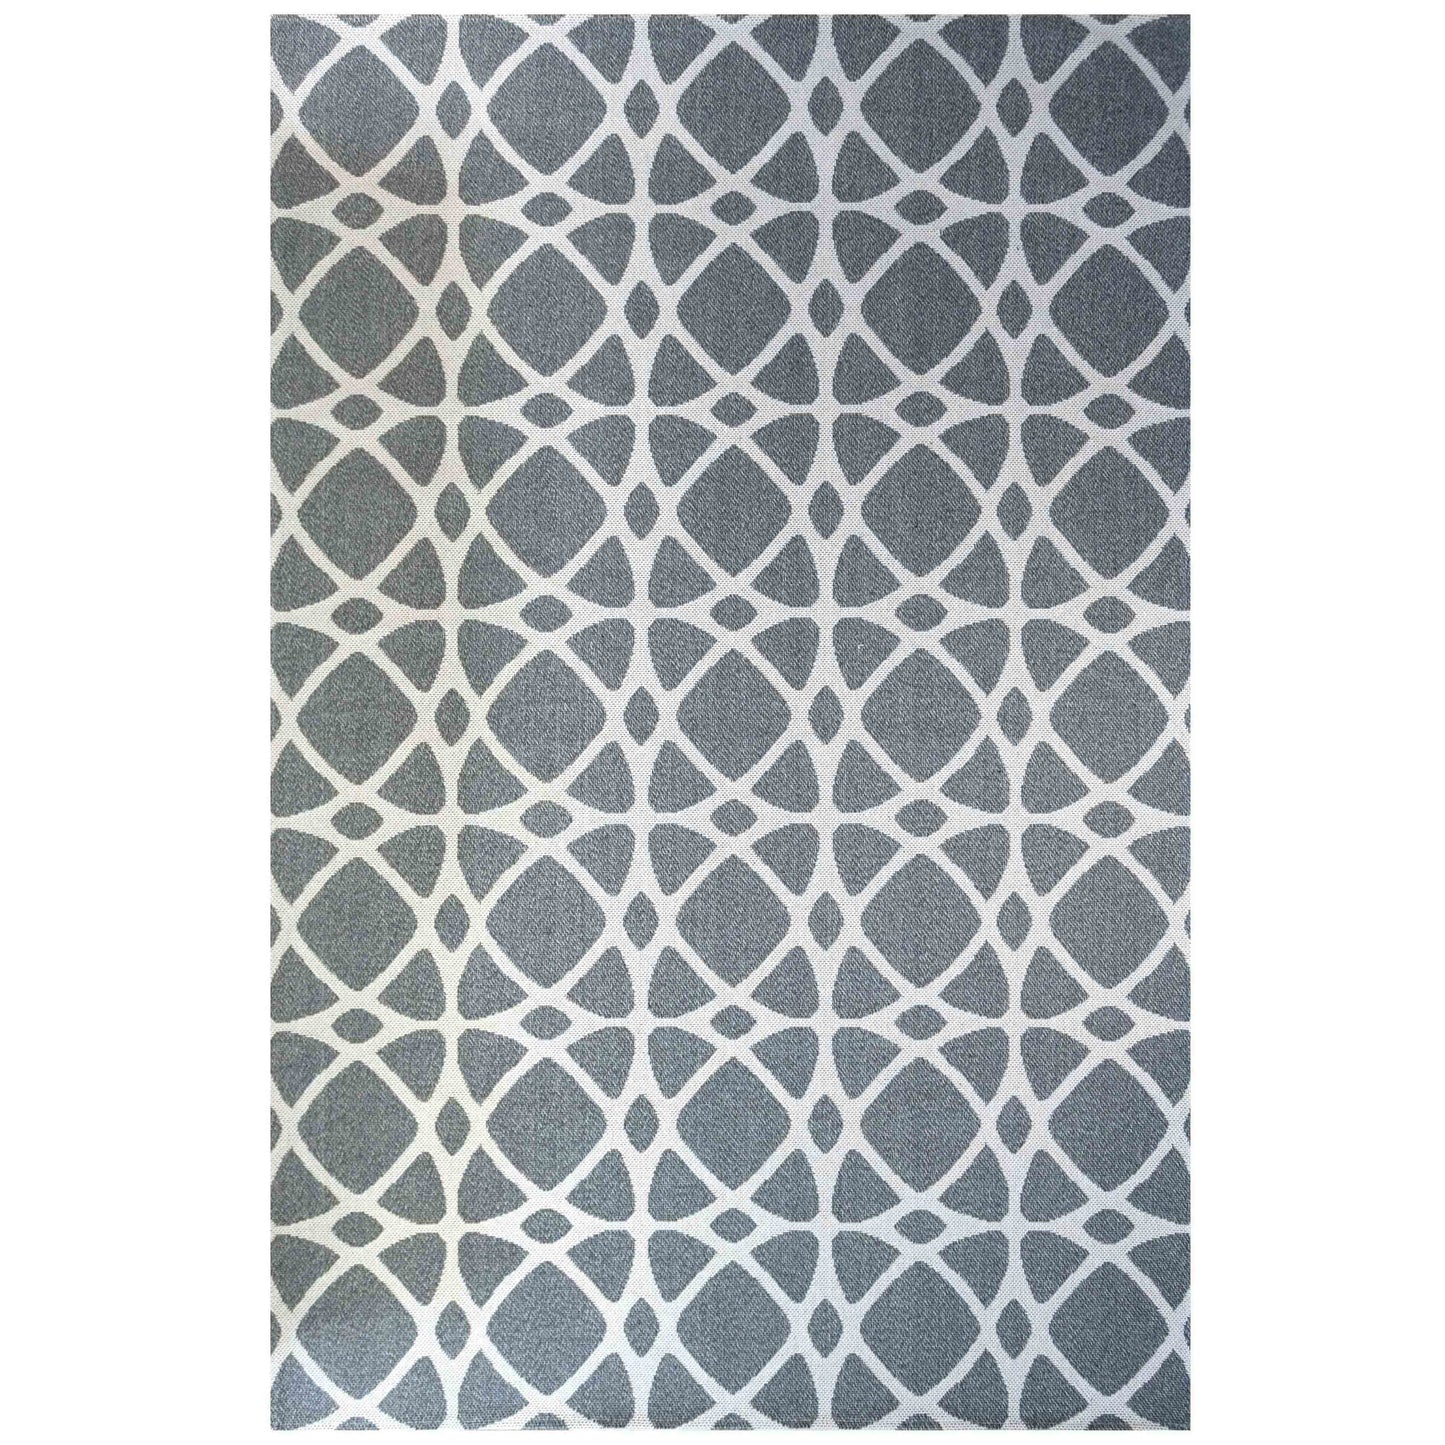 Art Deco Grey Woven Sustainable Recycled Cotton Rug